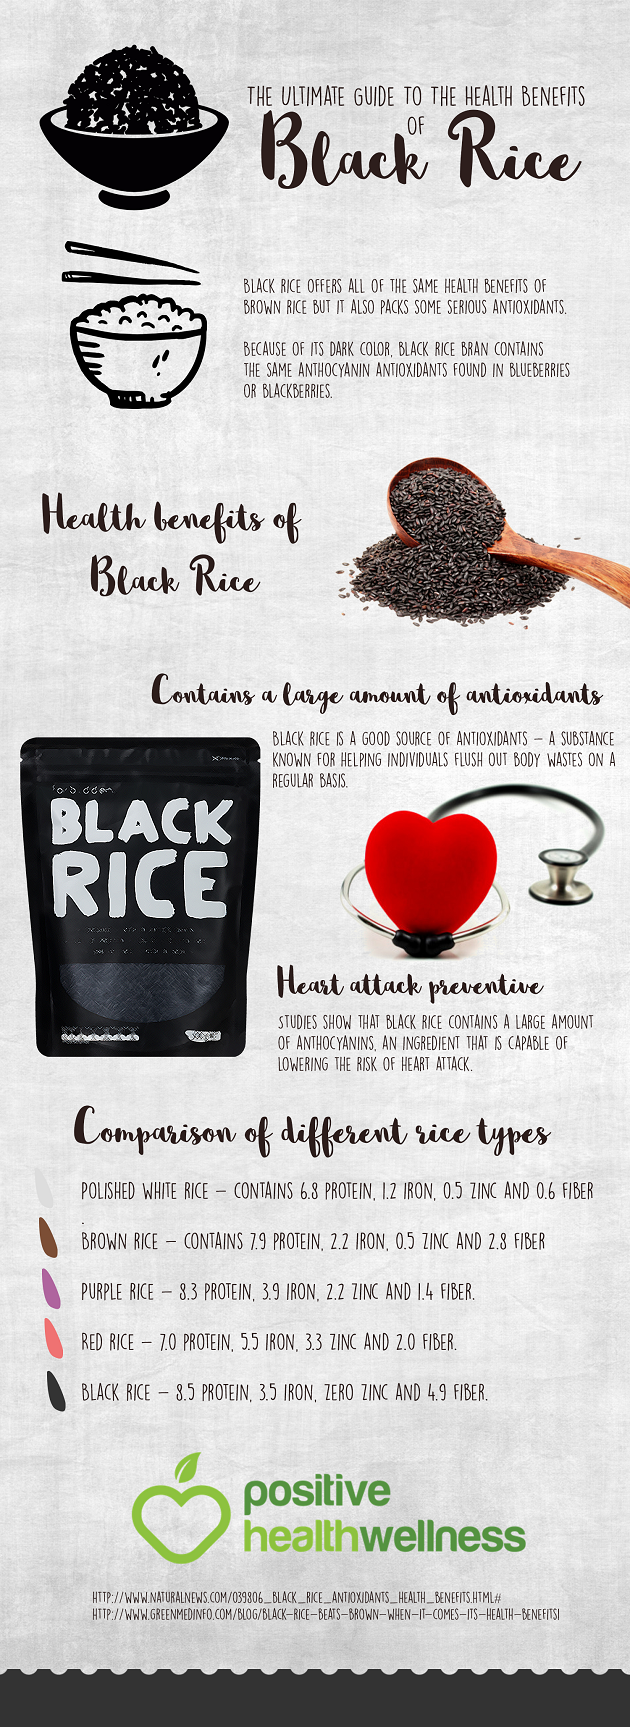 Black Rice: Health Benefits Of The Less-Known Ancient Grain Infographic